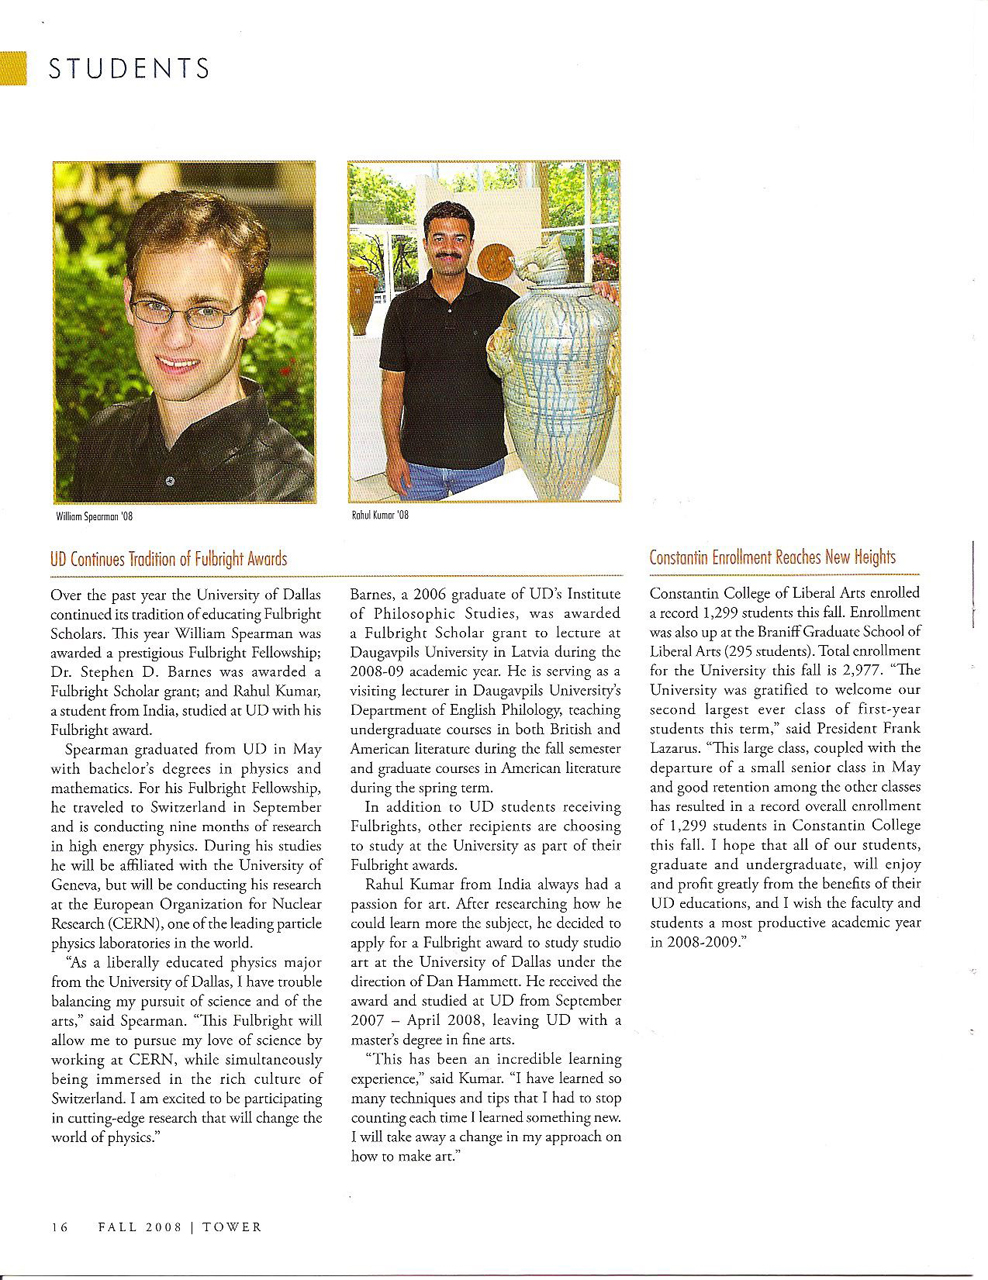 UD Continues Tradition of Fulbright - Tower Magazine, Pg. 16 May 2008